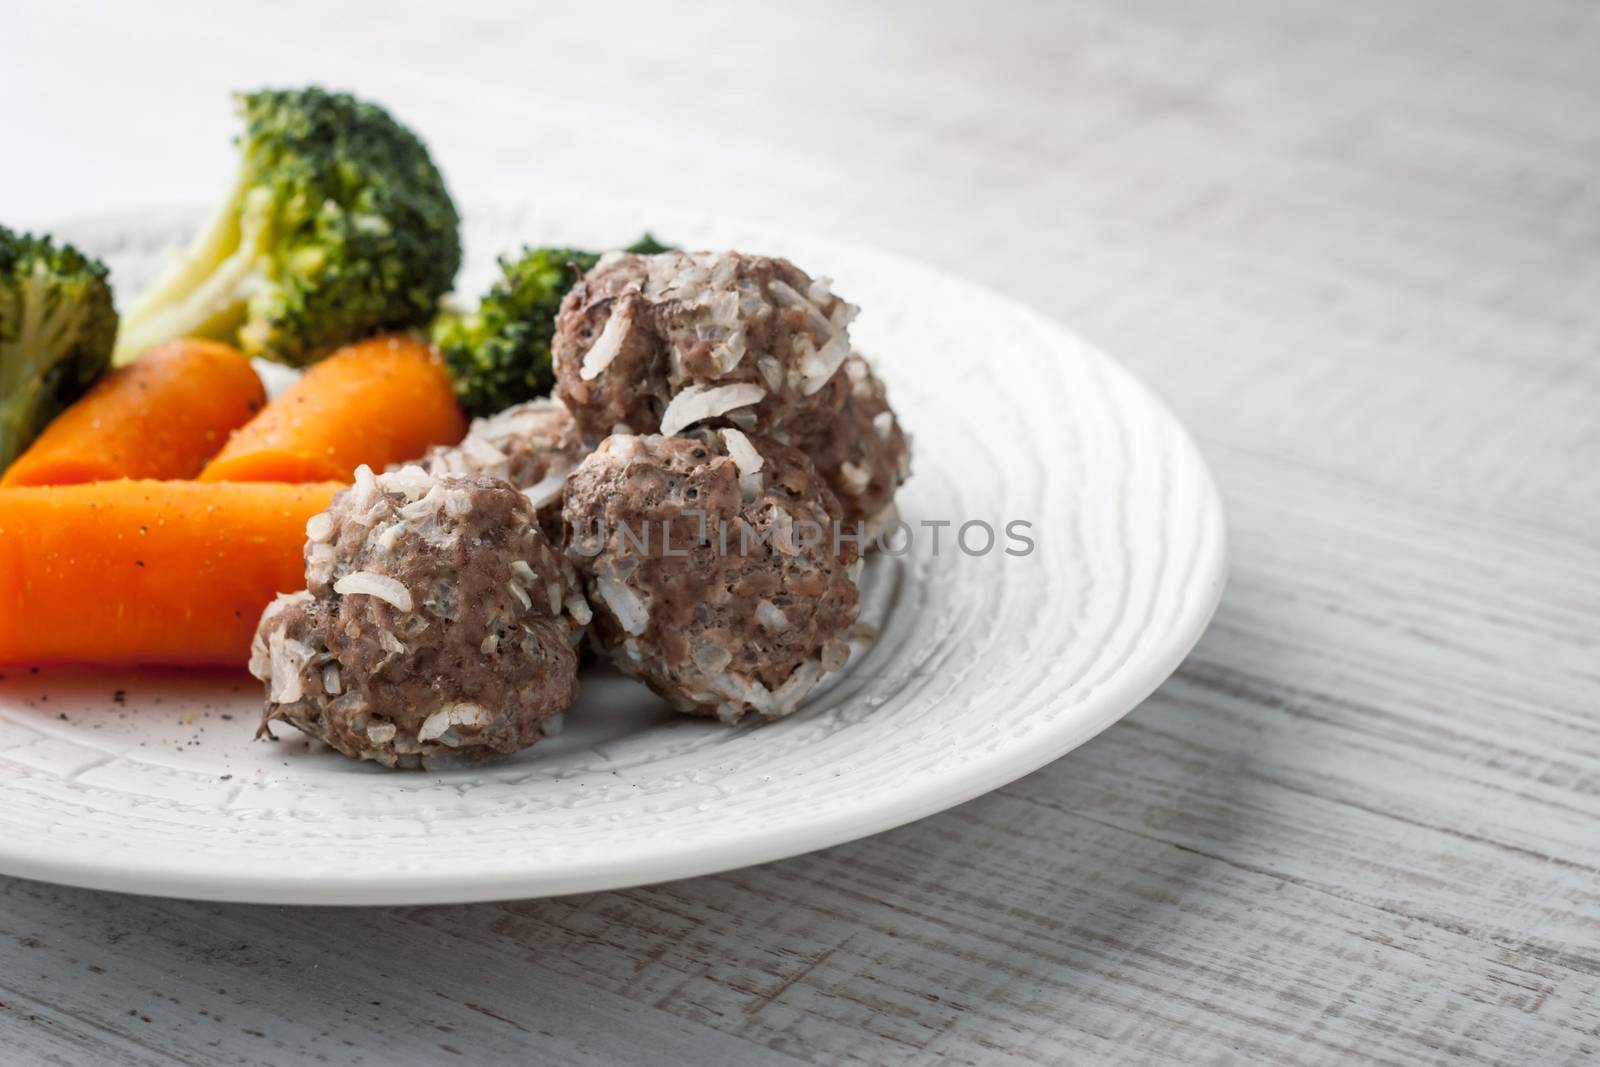 Meatballs with broccoli and carrots by Deniskarpenkov